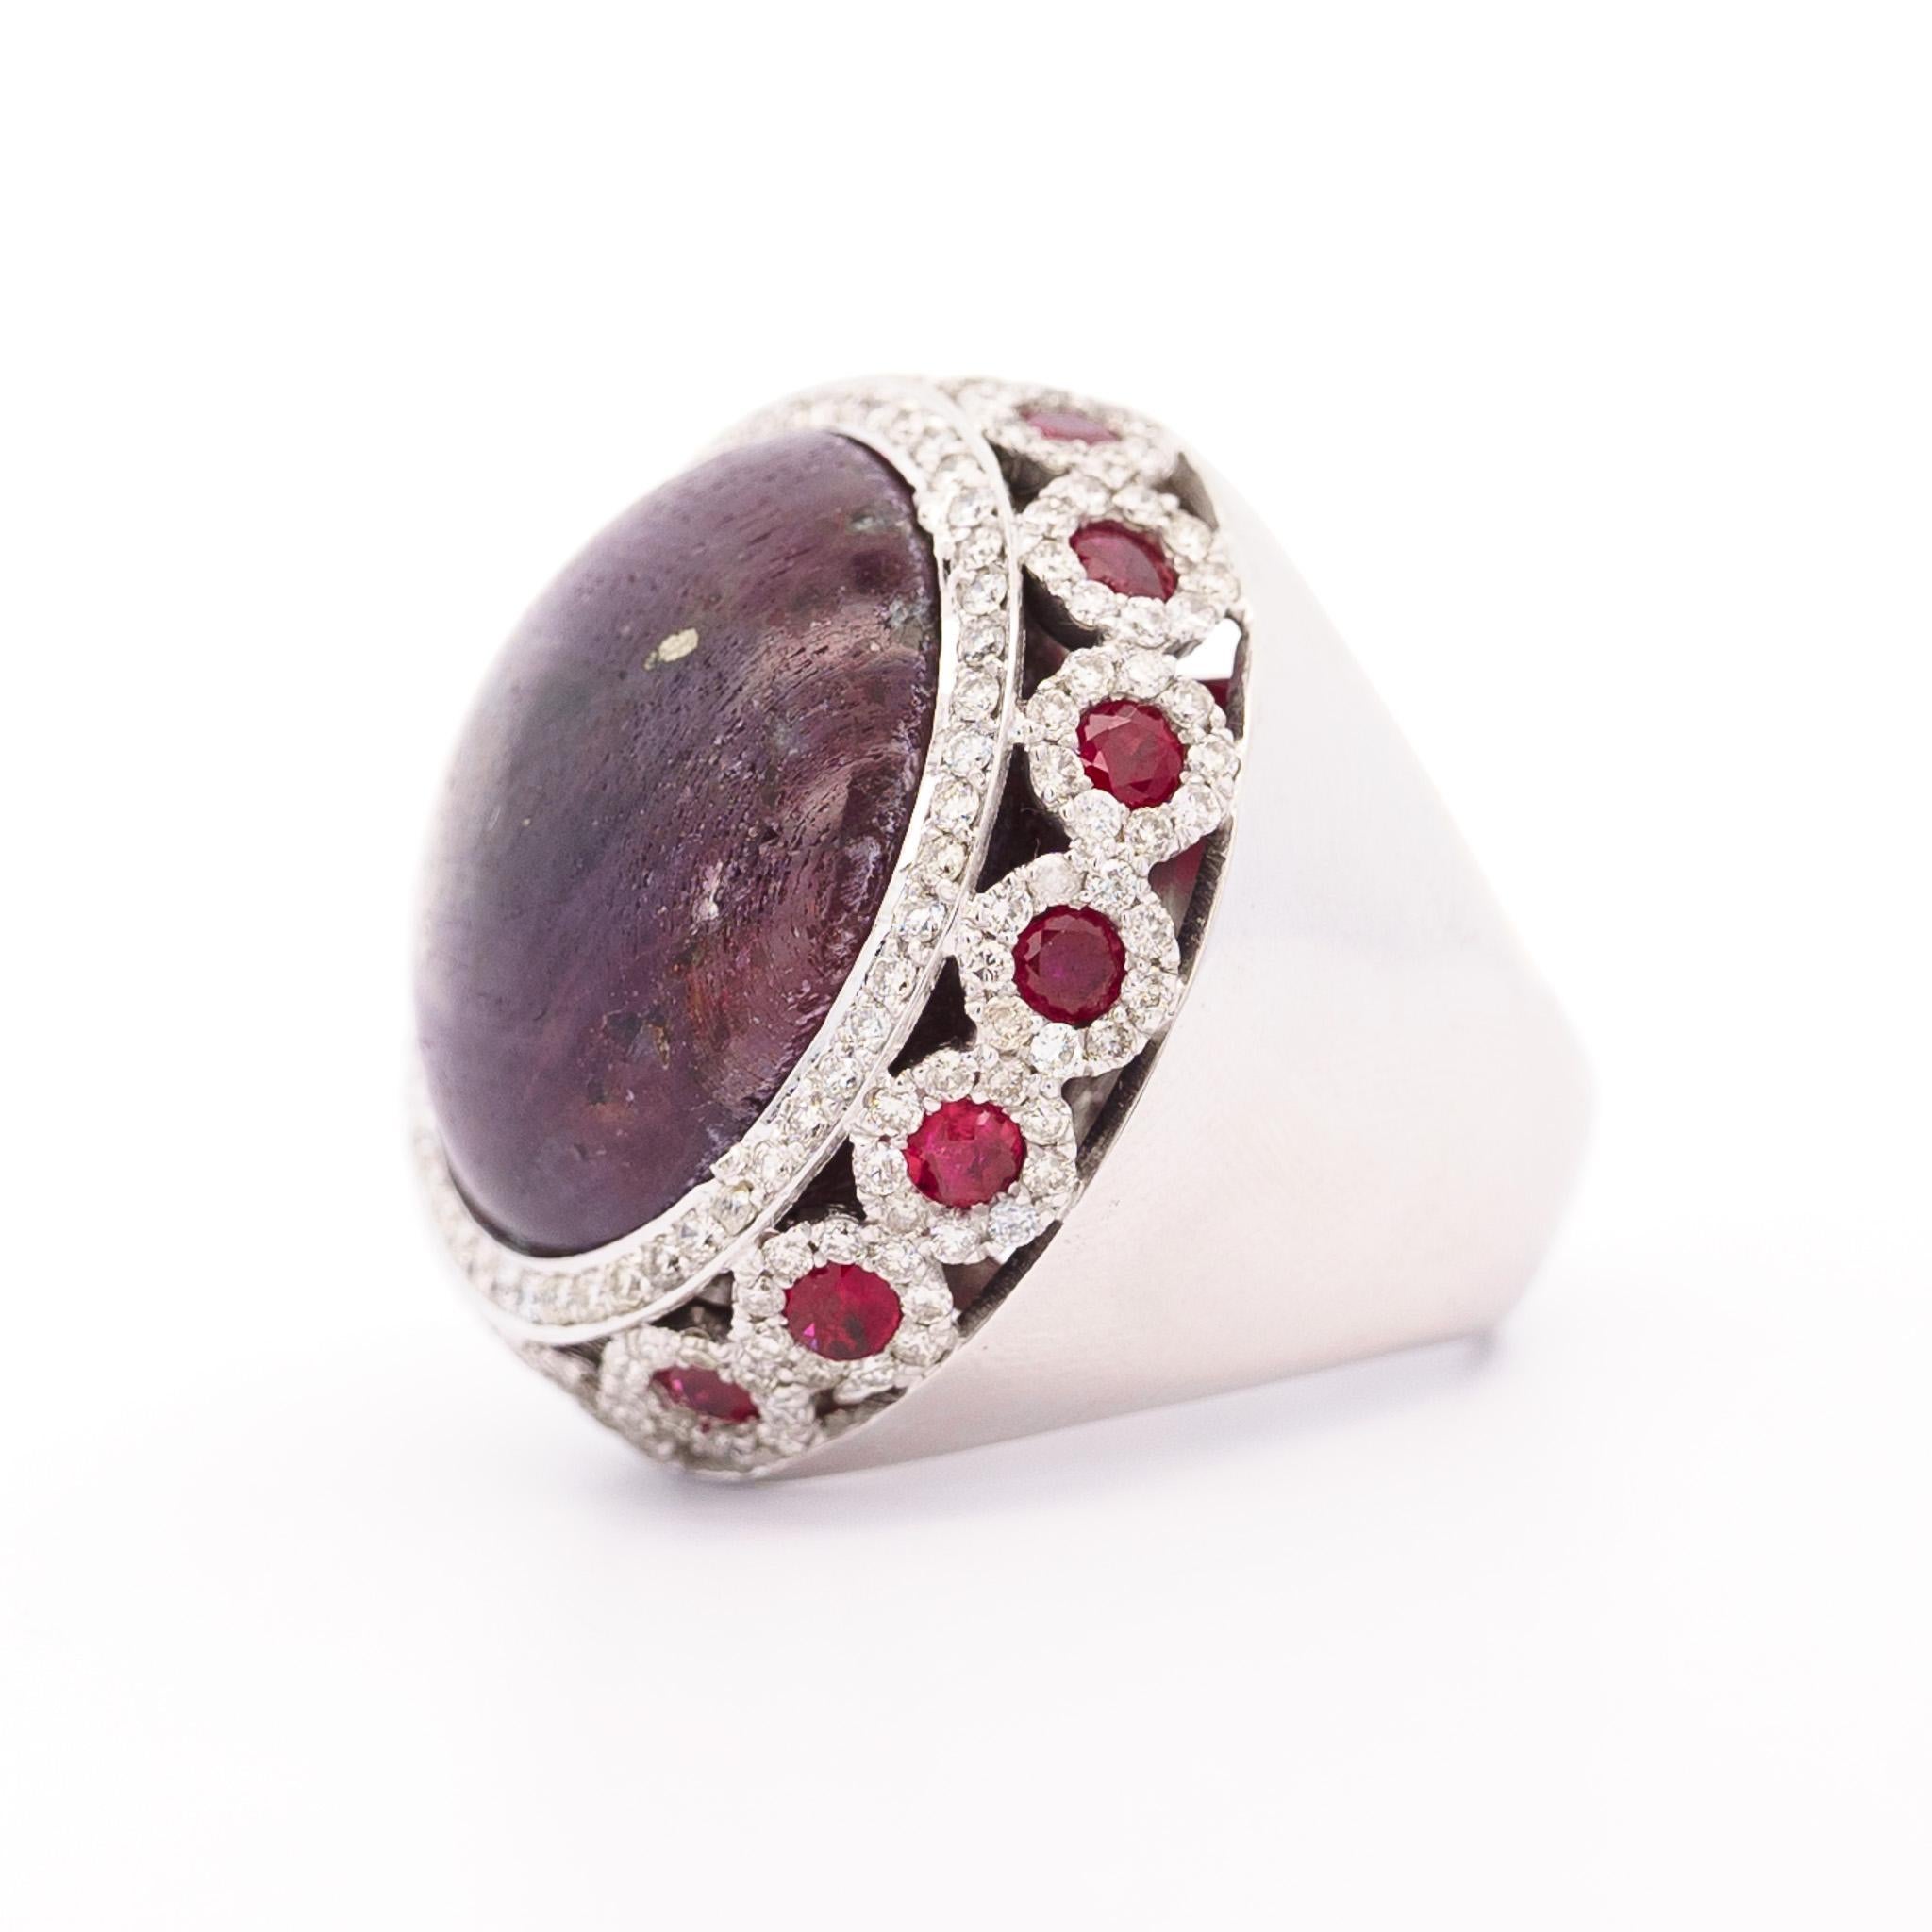 Belle Époque Vintage 50 Carat Star Ruby Cabochon 18K White Gold Gypsy Style Heavy Ring For Sale